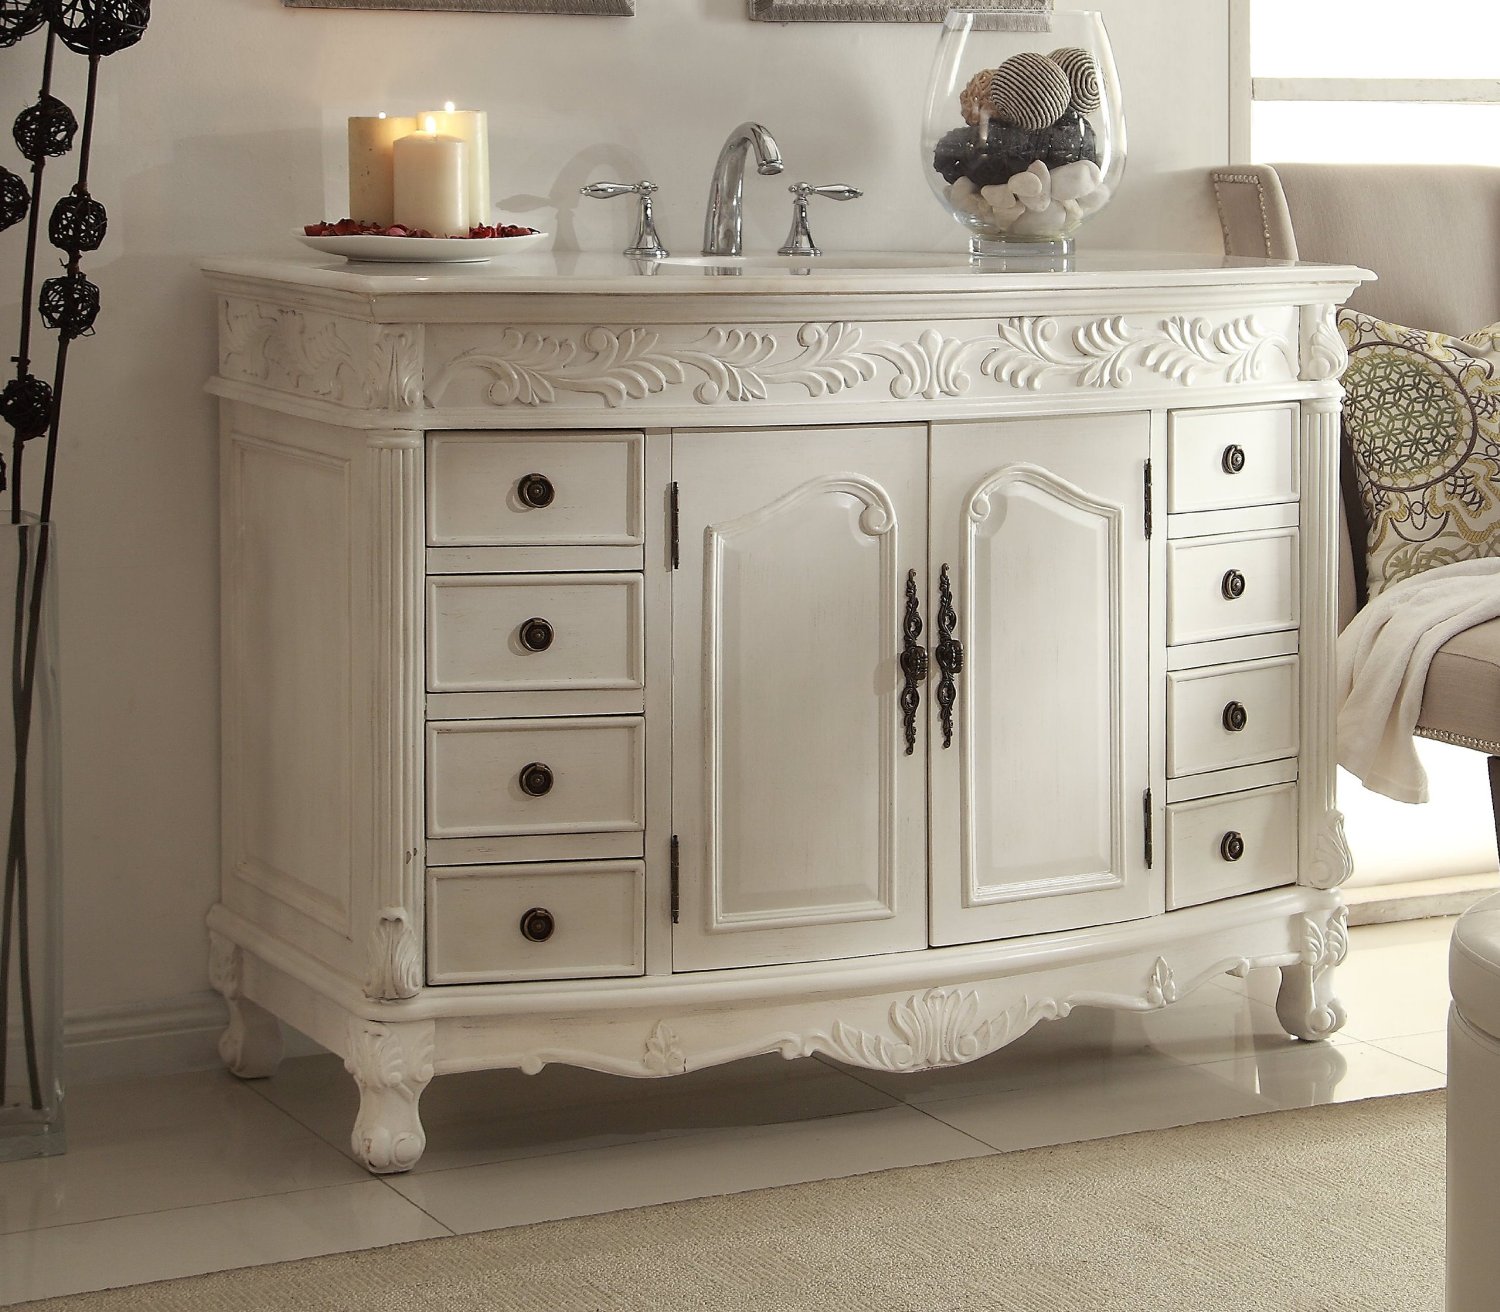 Bathroom White Bathroom Vanities With Marble Tops Excellent On Pertaining To Adelina 48 Inch Antique Vanity Top 24 White Bathroom Vanities With Marble Tops